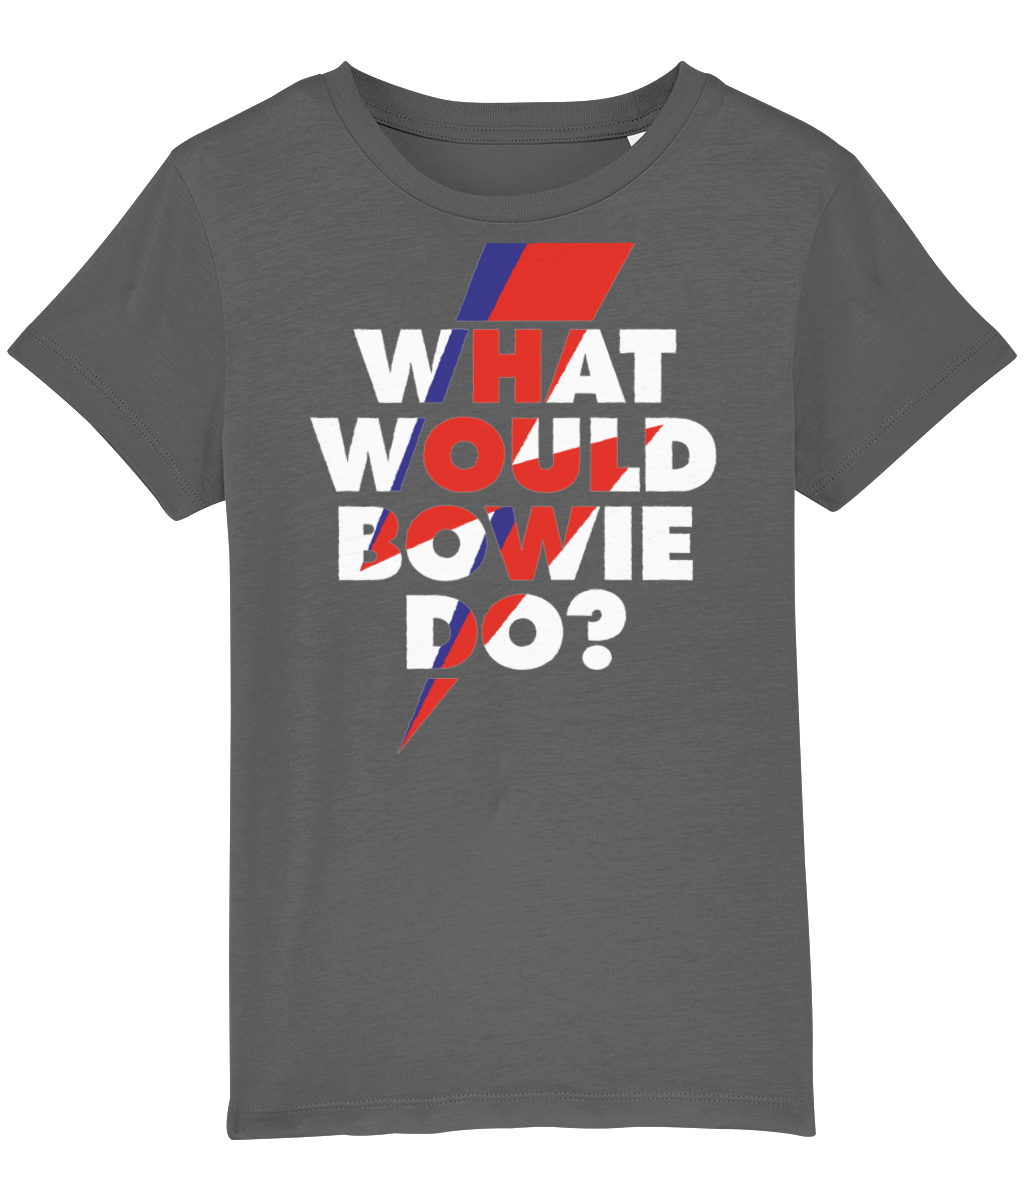 Organic Cotton Junior T Shirt, What Would Bowie Do?